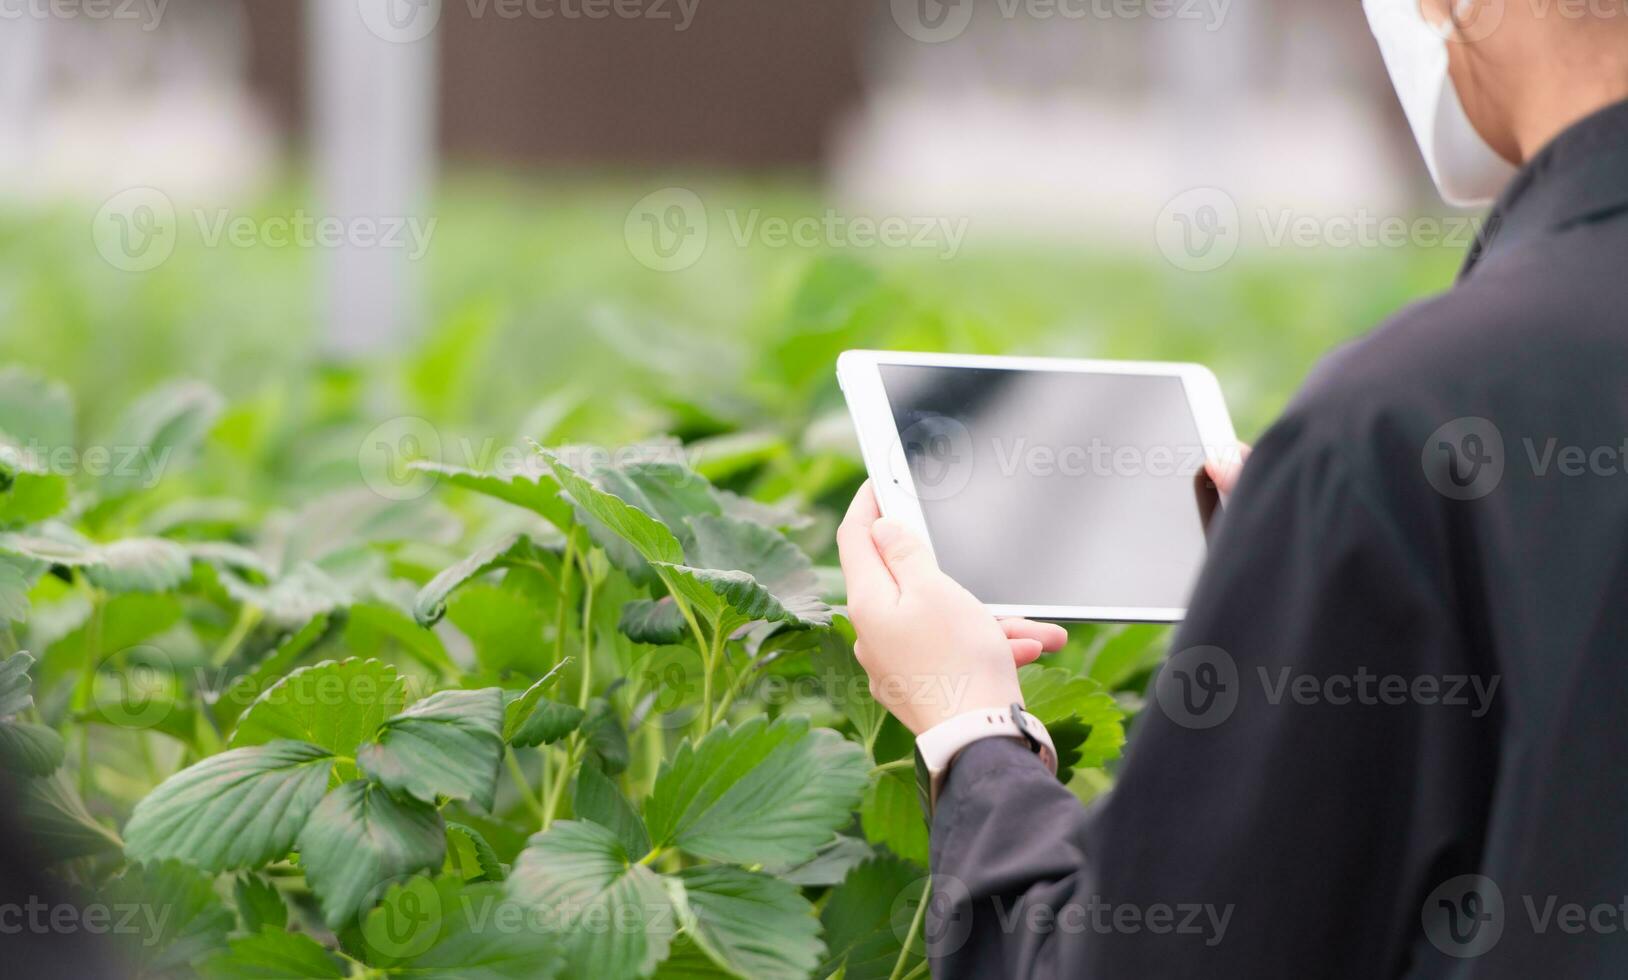 Scientists are examining the growth of strawberries grown with scientific technology in a closed strawberry garden photo